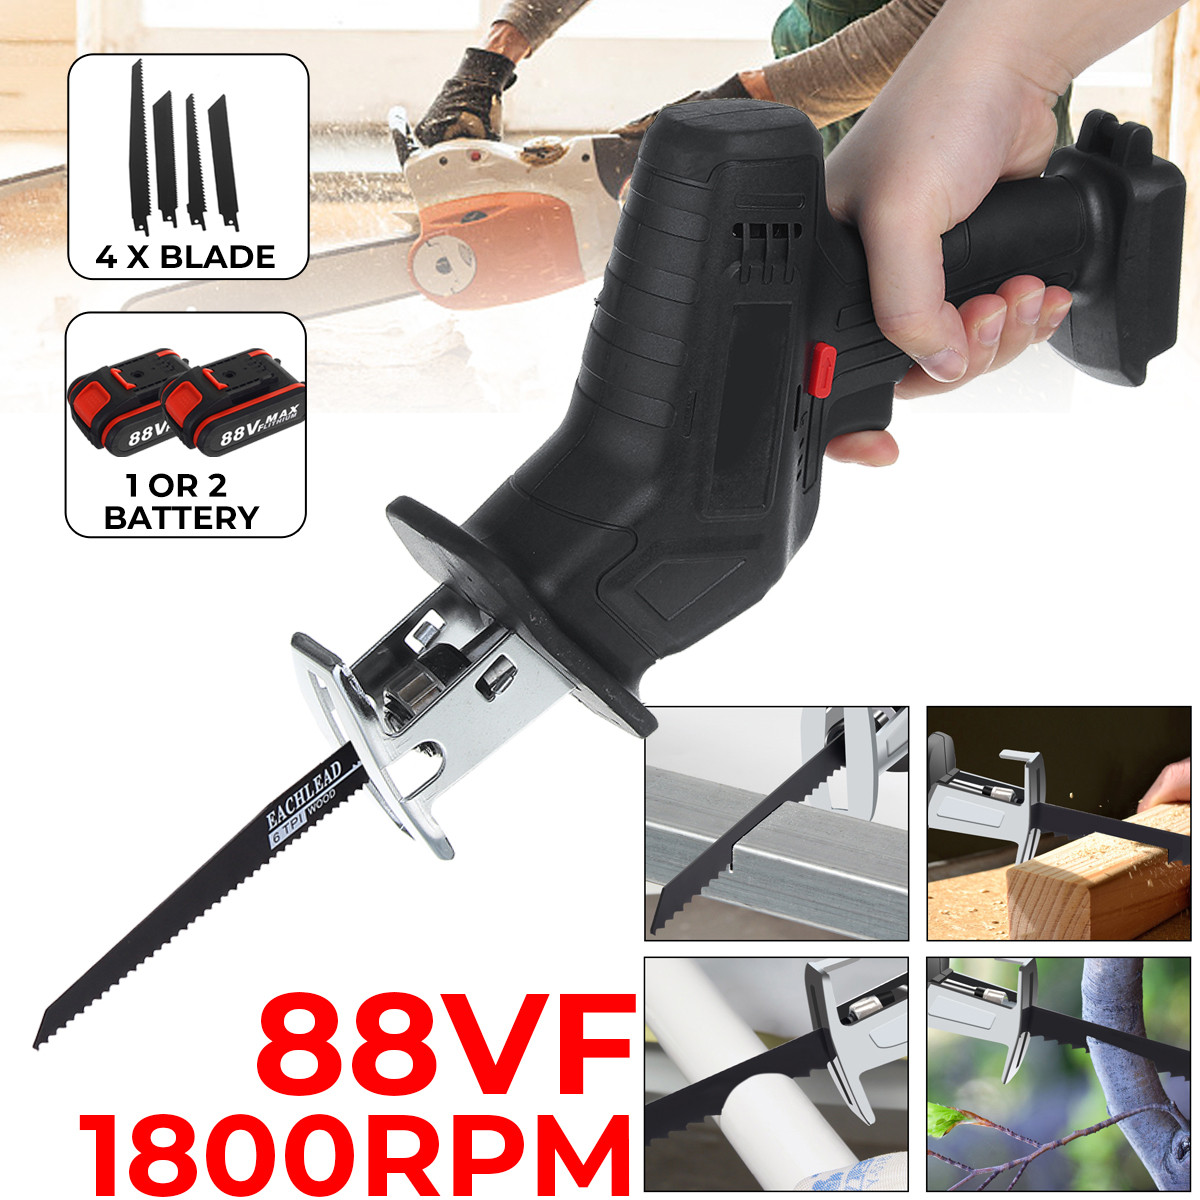 88VF-Cordless-Rechargeable-Electric-Reciprocating-Saw-Portable-Wood-Metal-Plastic-Cutting-Tool-W-1-o-1772566-1